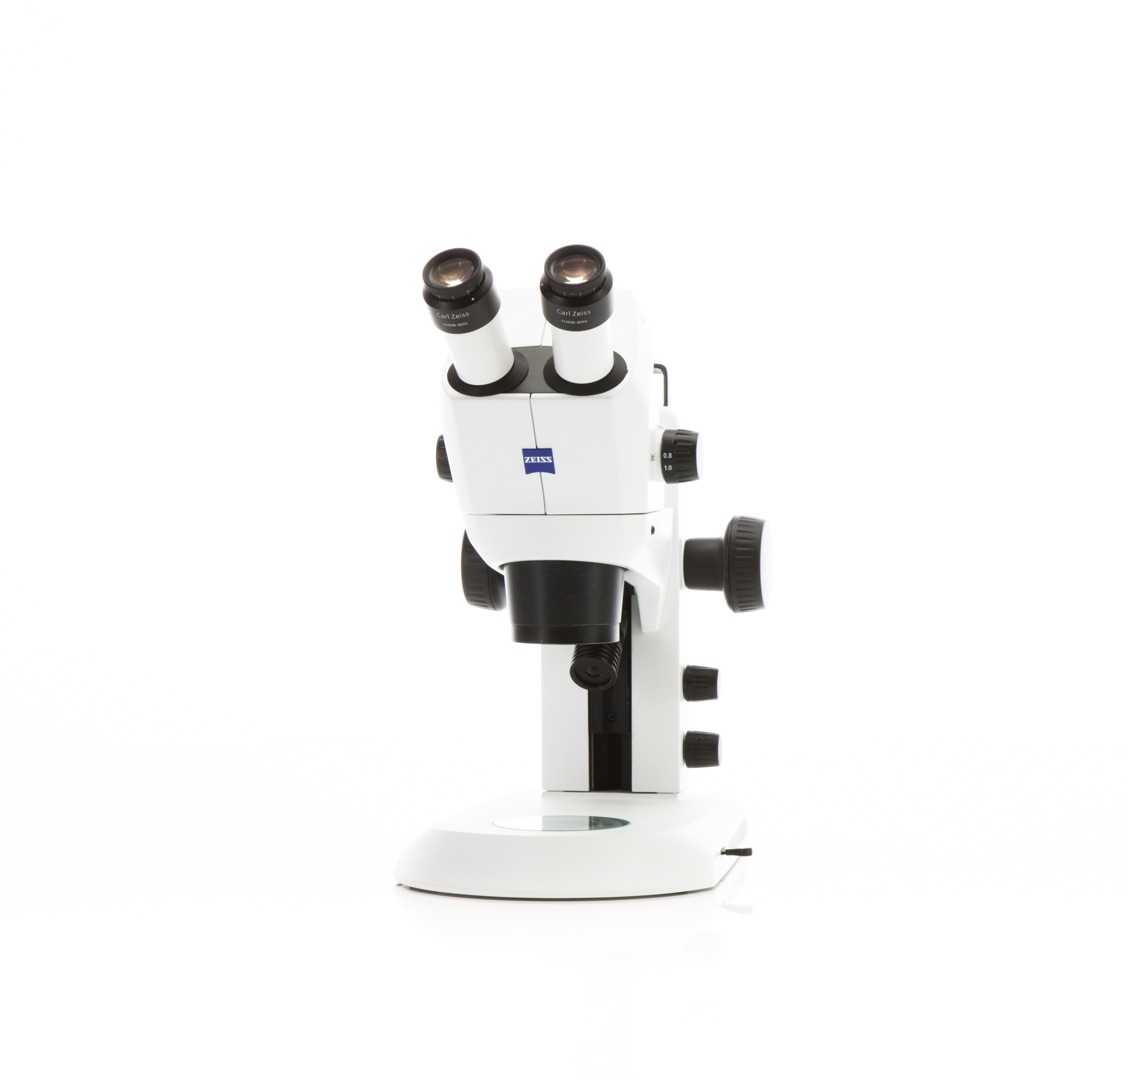 ZEISS Stemi 305 Stereo Microscope with 5:1 Zoom